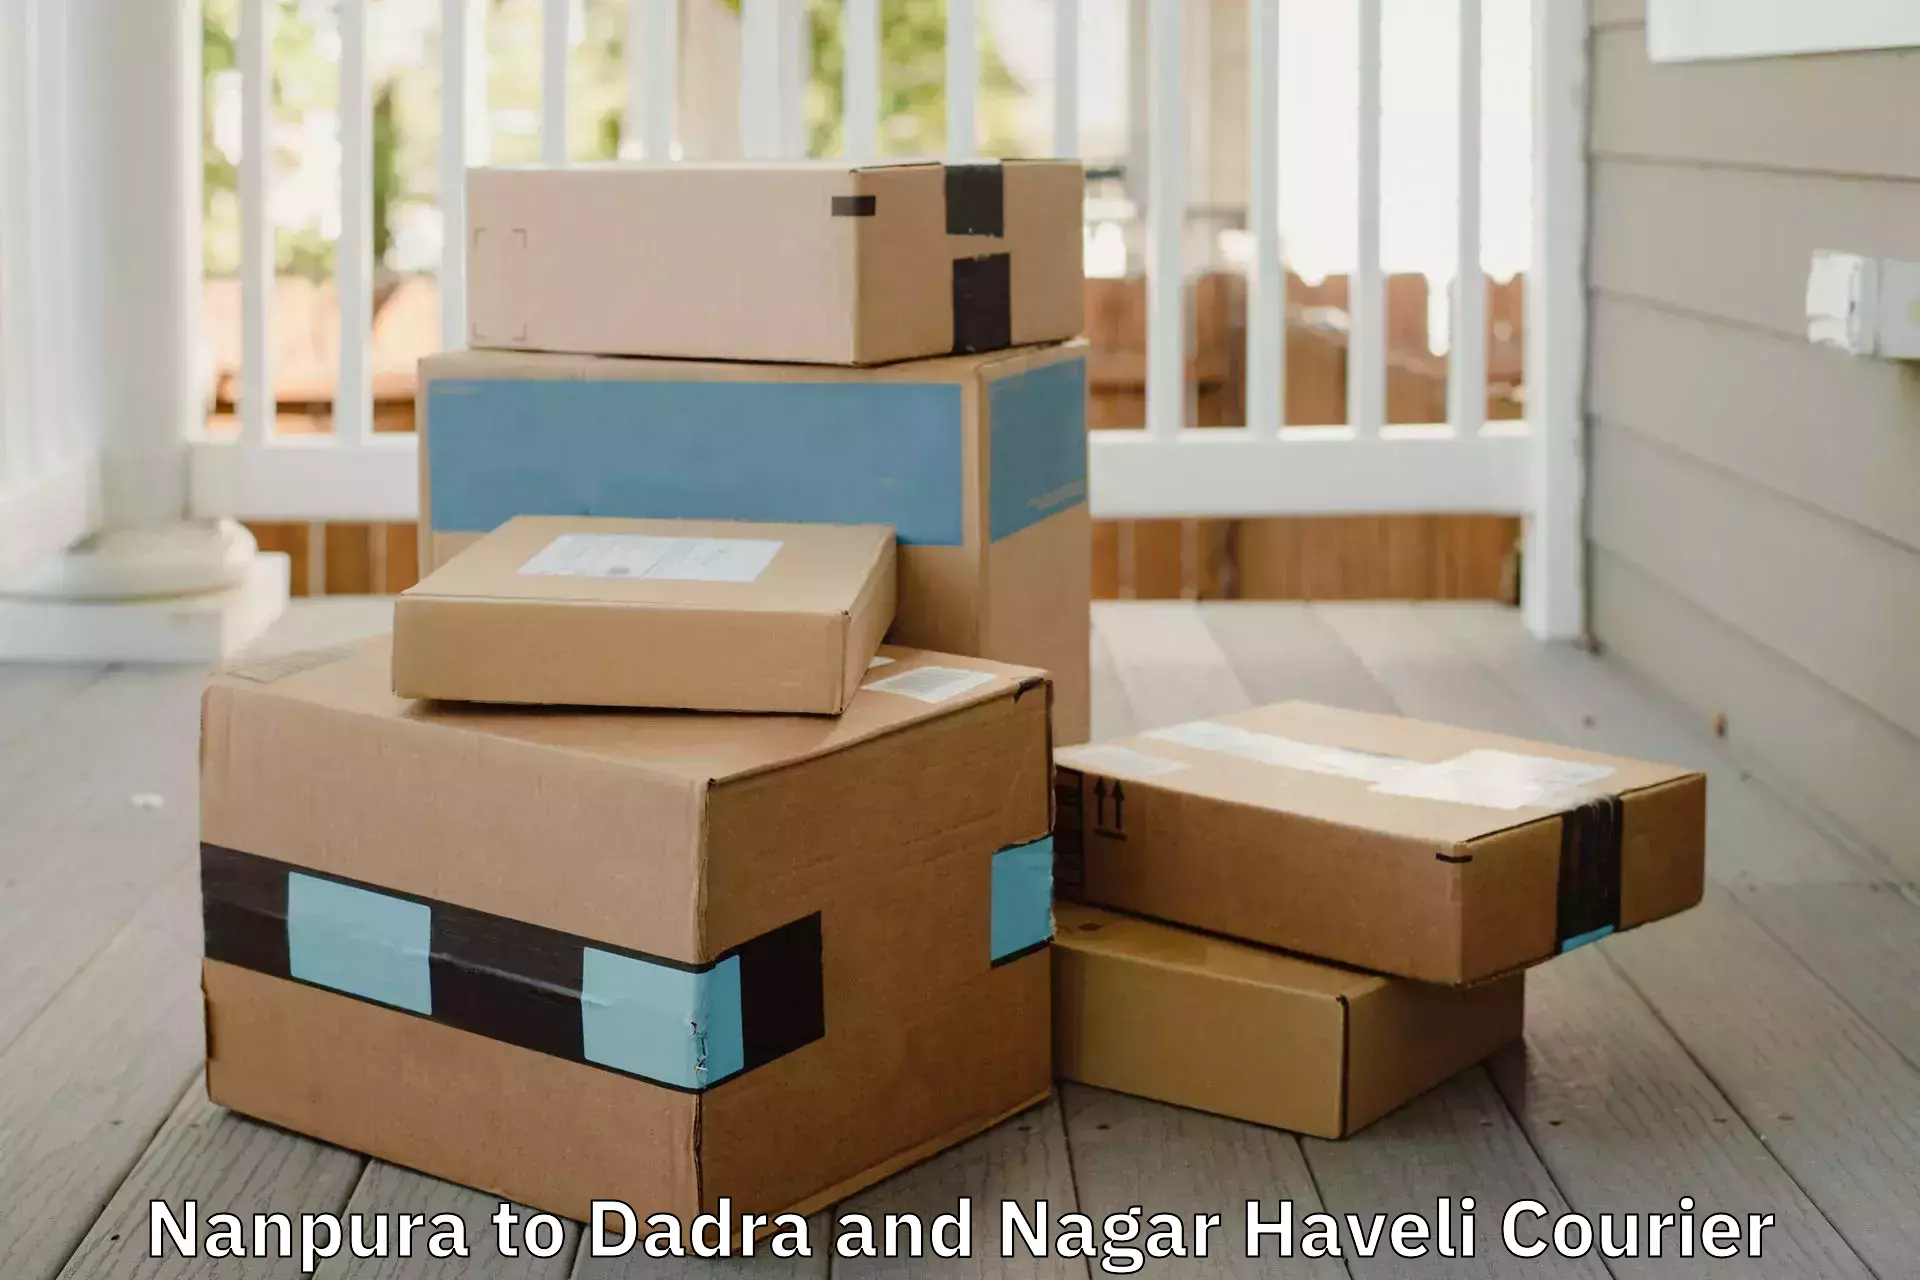 Furniture moving specialists Nanpura to Dadra and Nagar Haveli